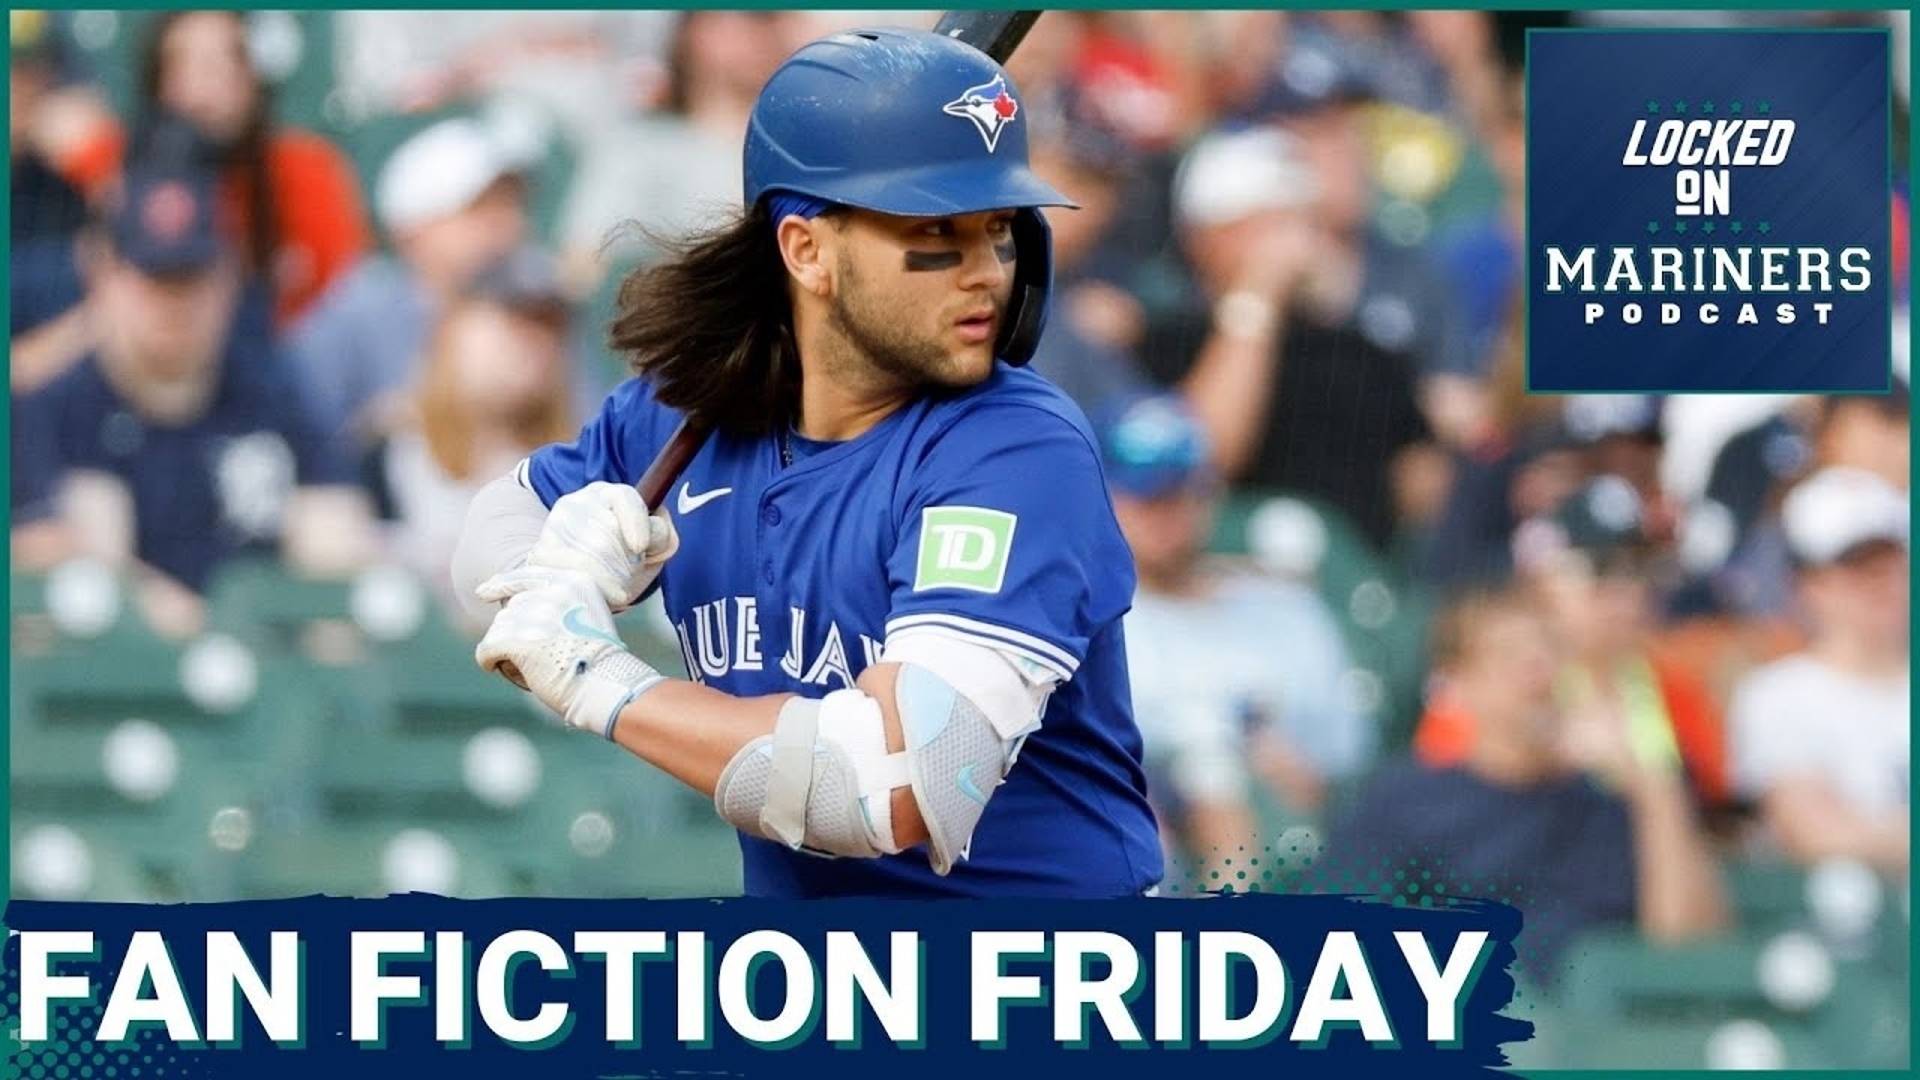 It's the return of Fan Fiction Friday! Ty and Colby grade your Mariners trade ideas, including deals for Bo Bichette, Christian Walker, Kerry Carpenter, and more.